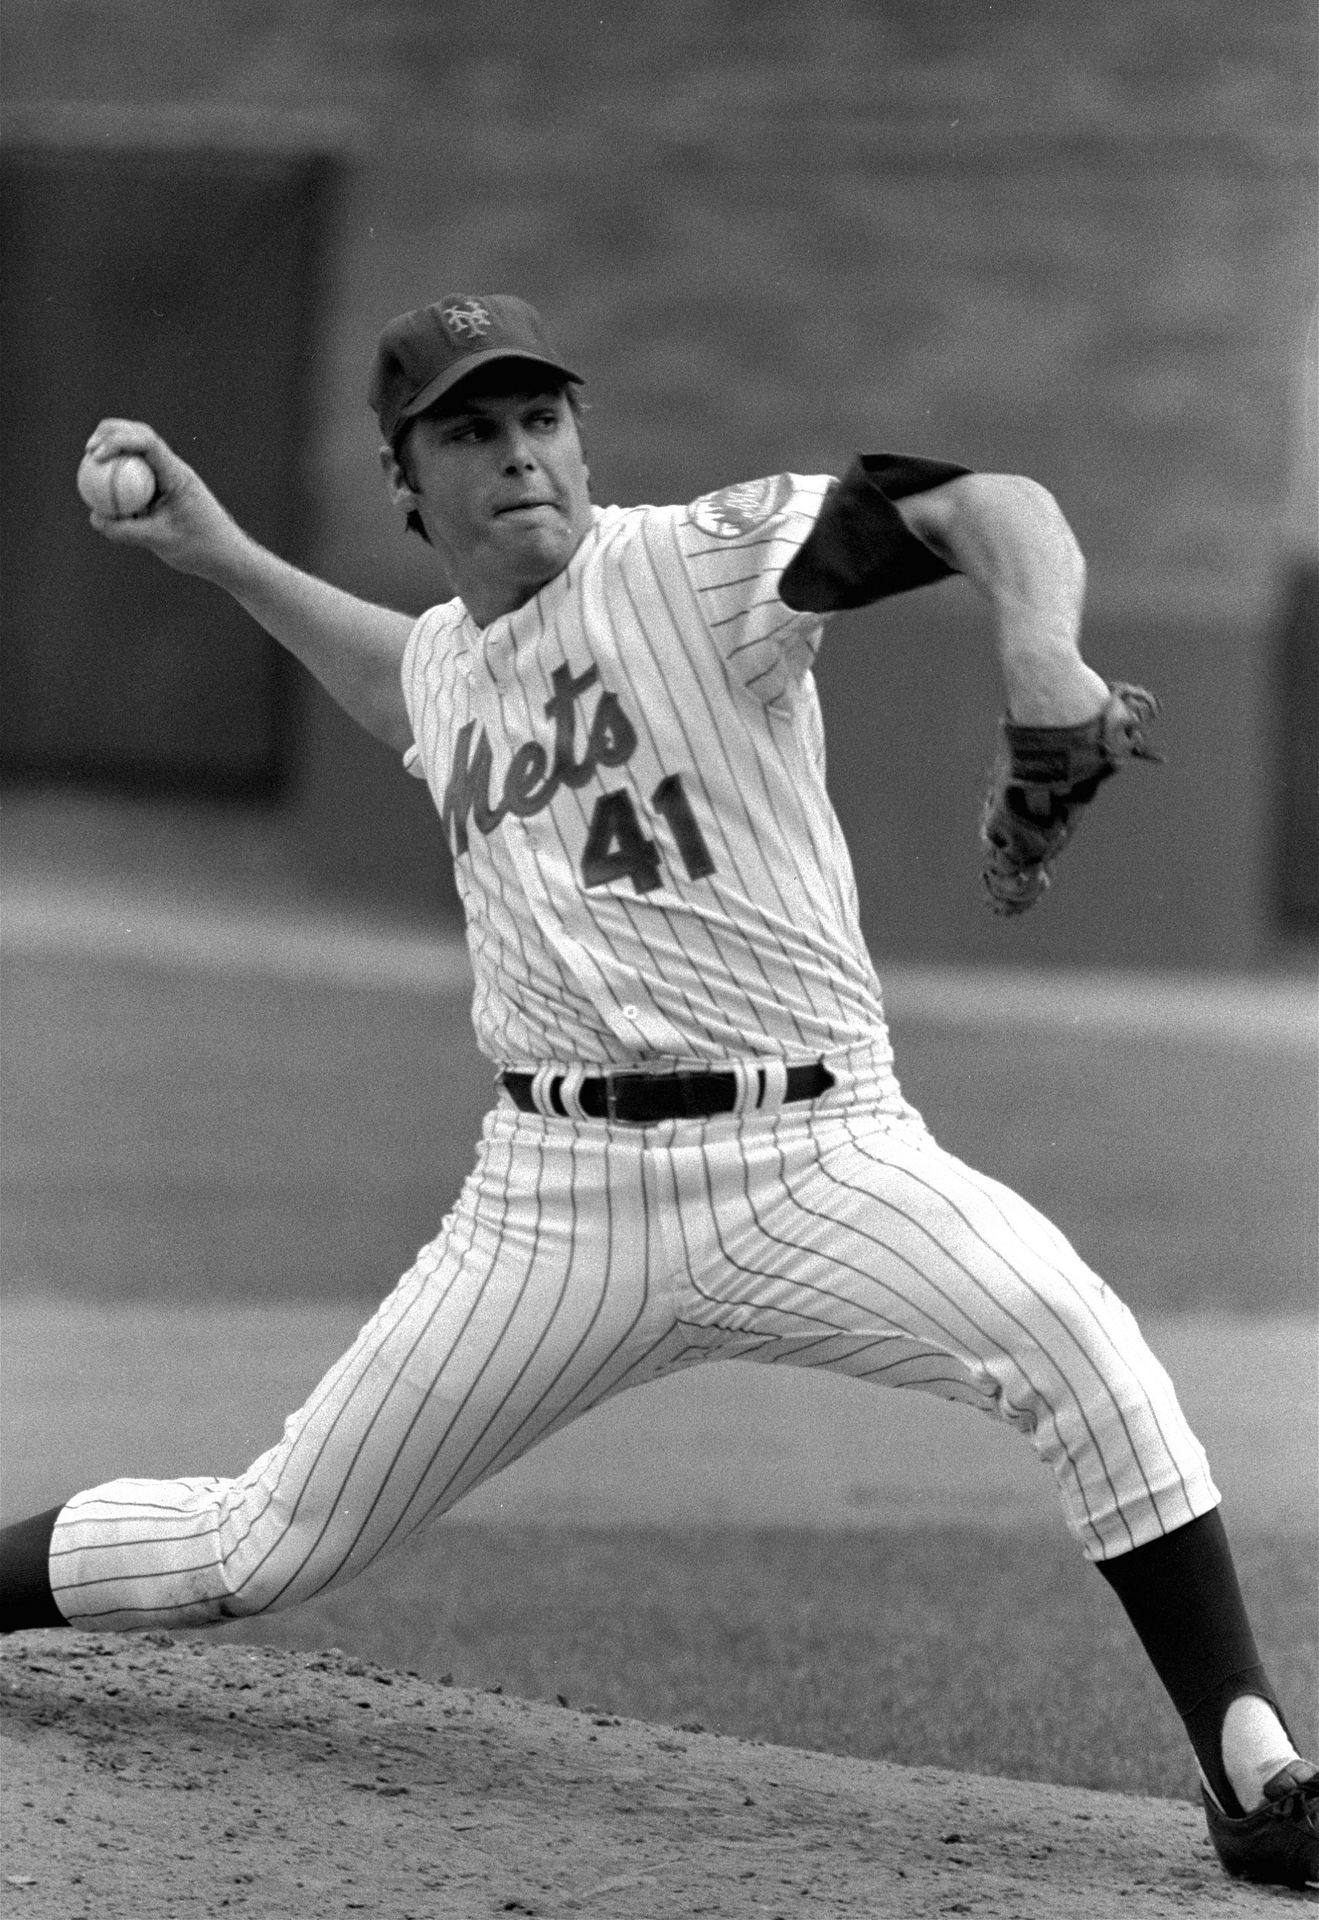 Tom Seaver Dead of Lewy Body Dementia and COVID-19 Complications